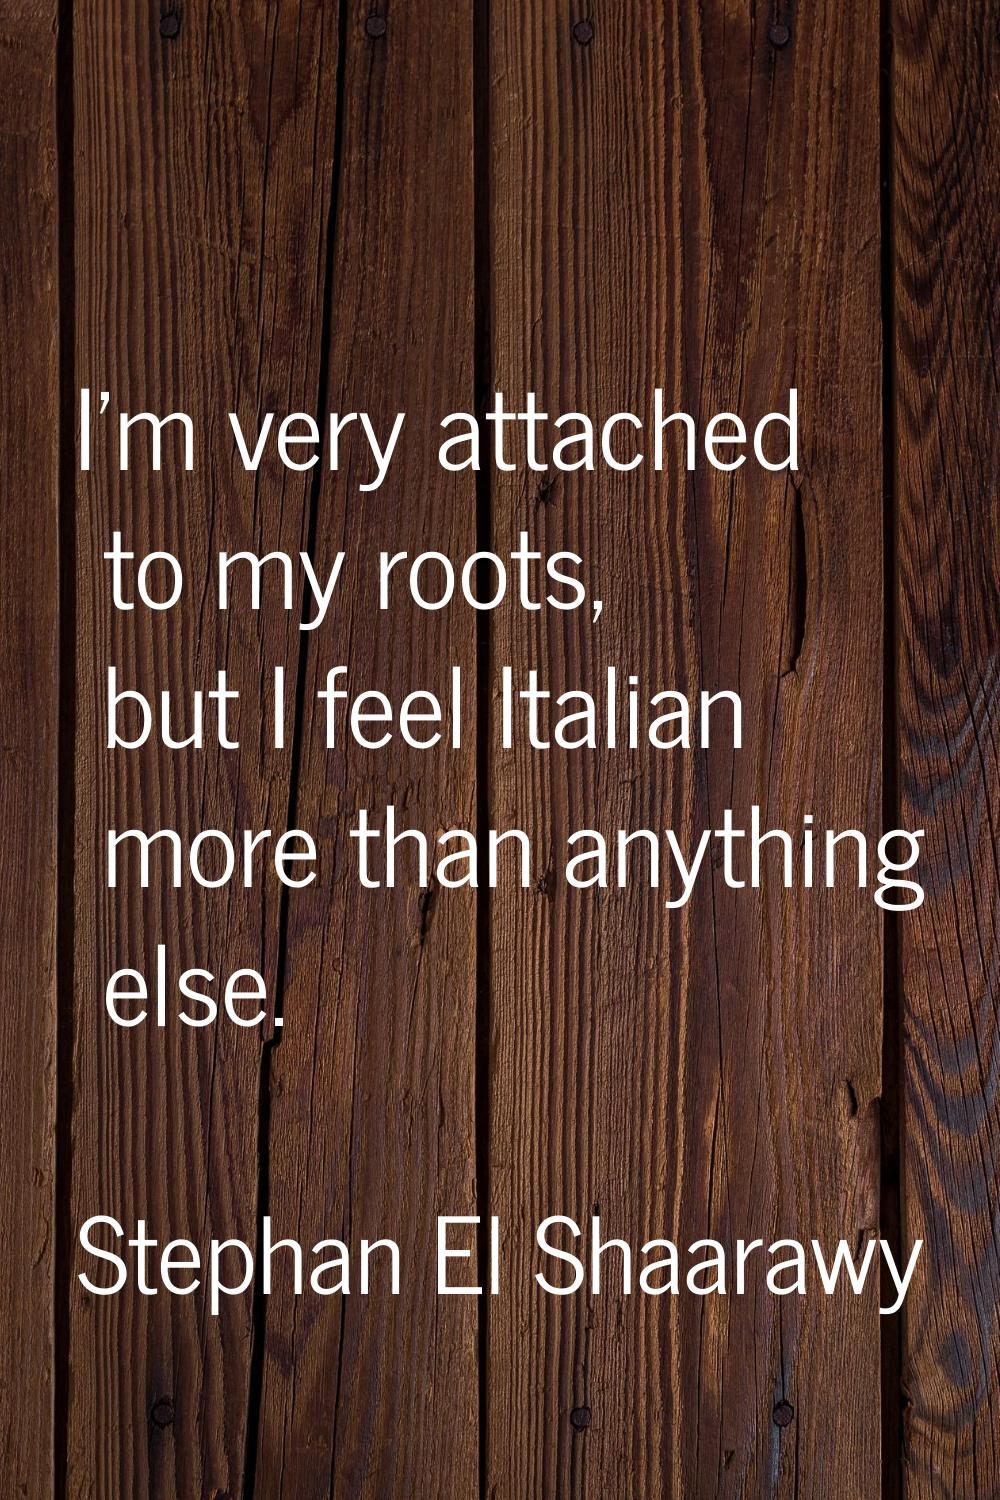 I'm very attached to my roots, but I feel Italian more than anything else.